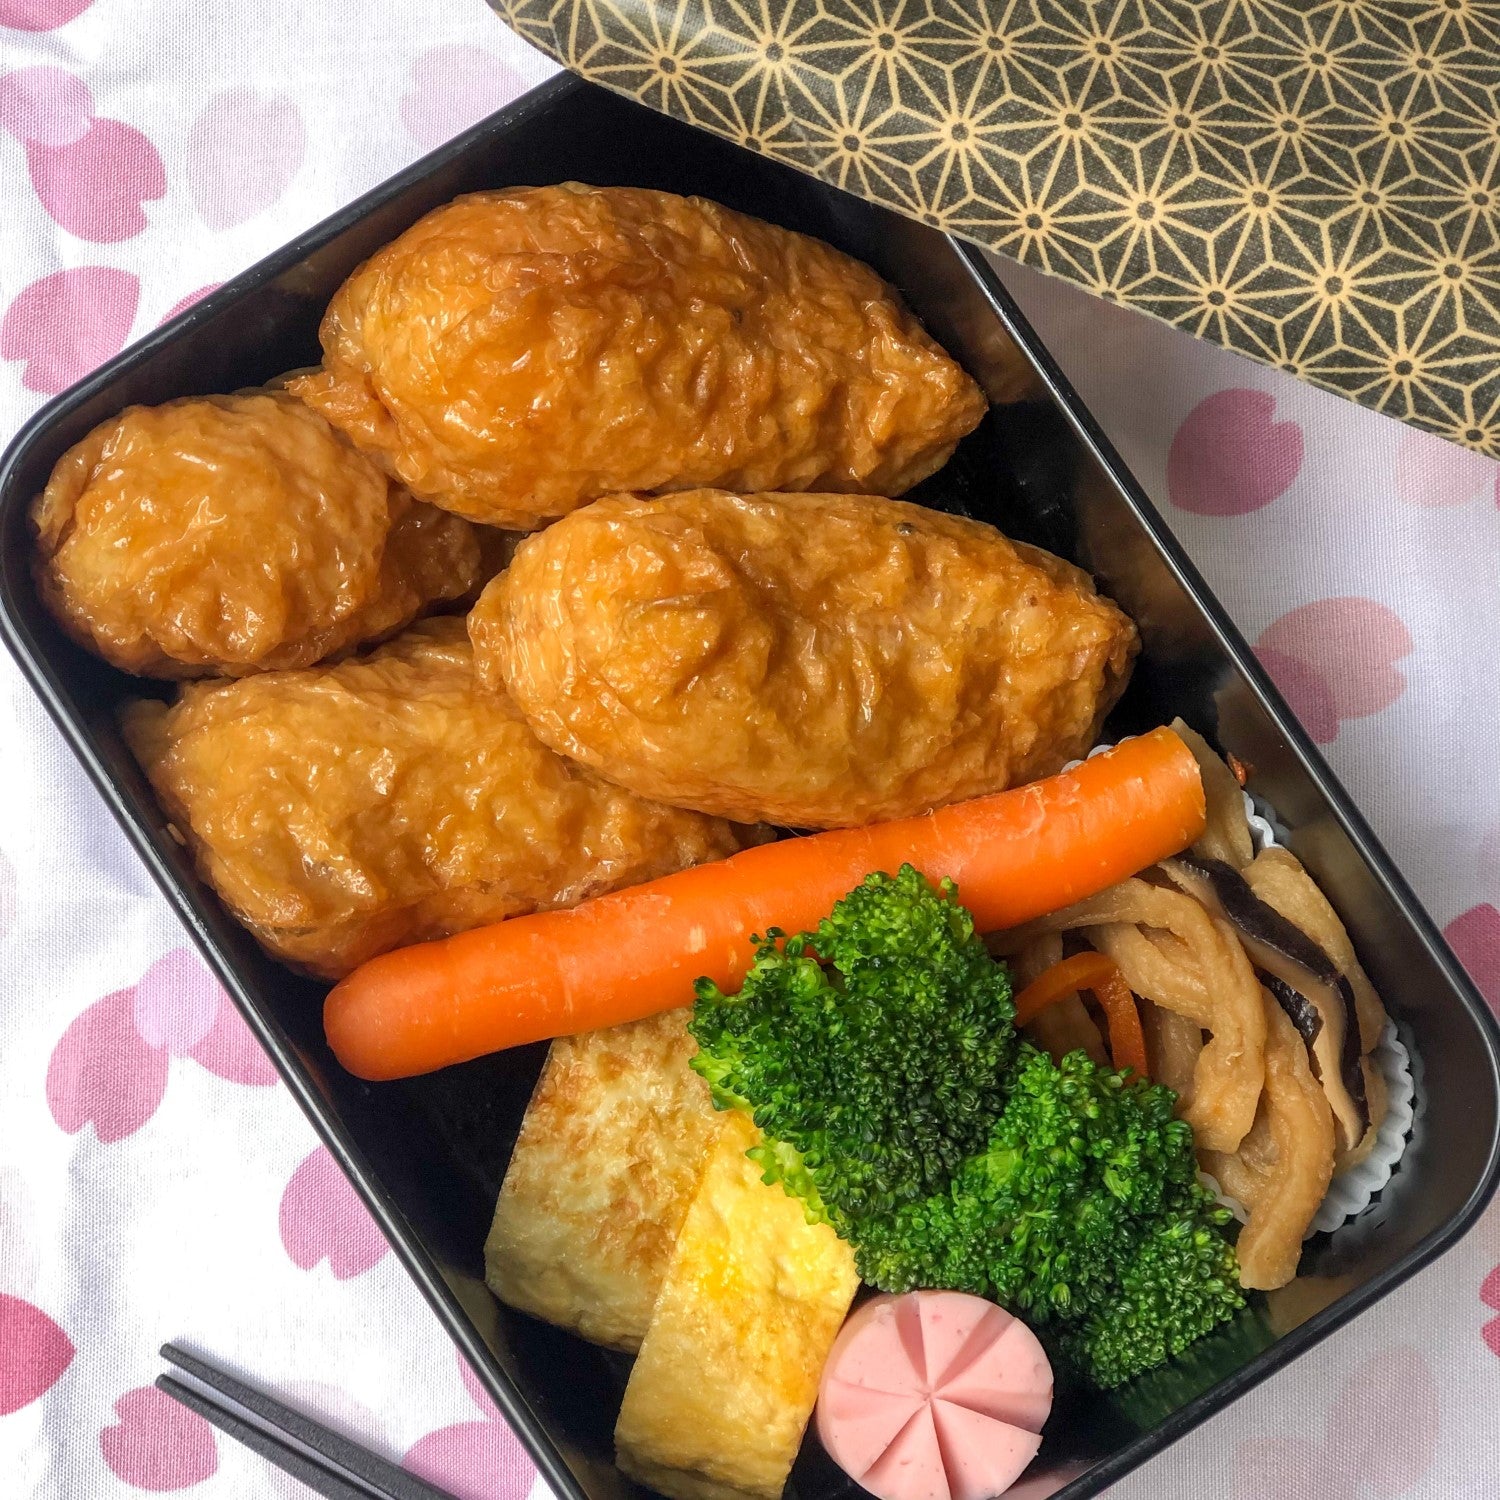 Majime Life Wagara Asanoha 1 tier bento box from Japan Japanese bento boxes for adults Made In Japan bento lunch box with food